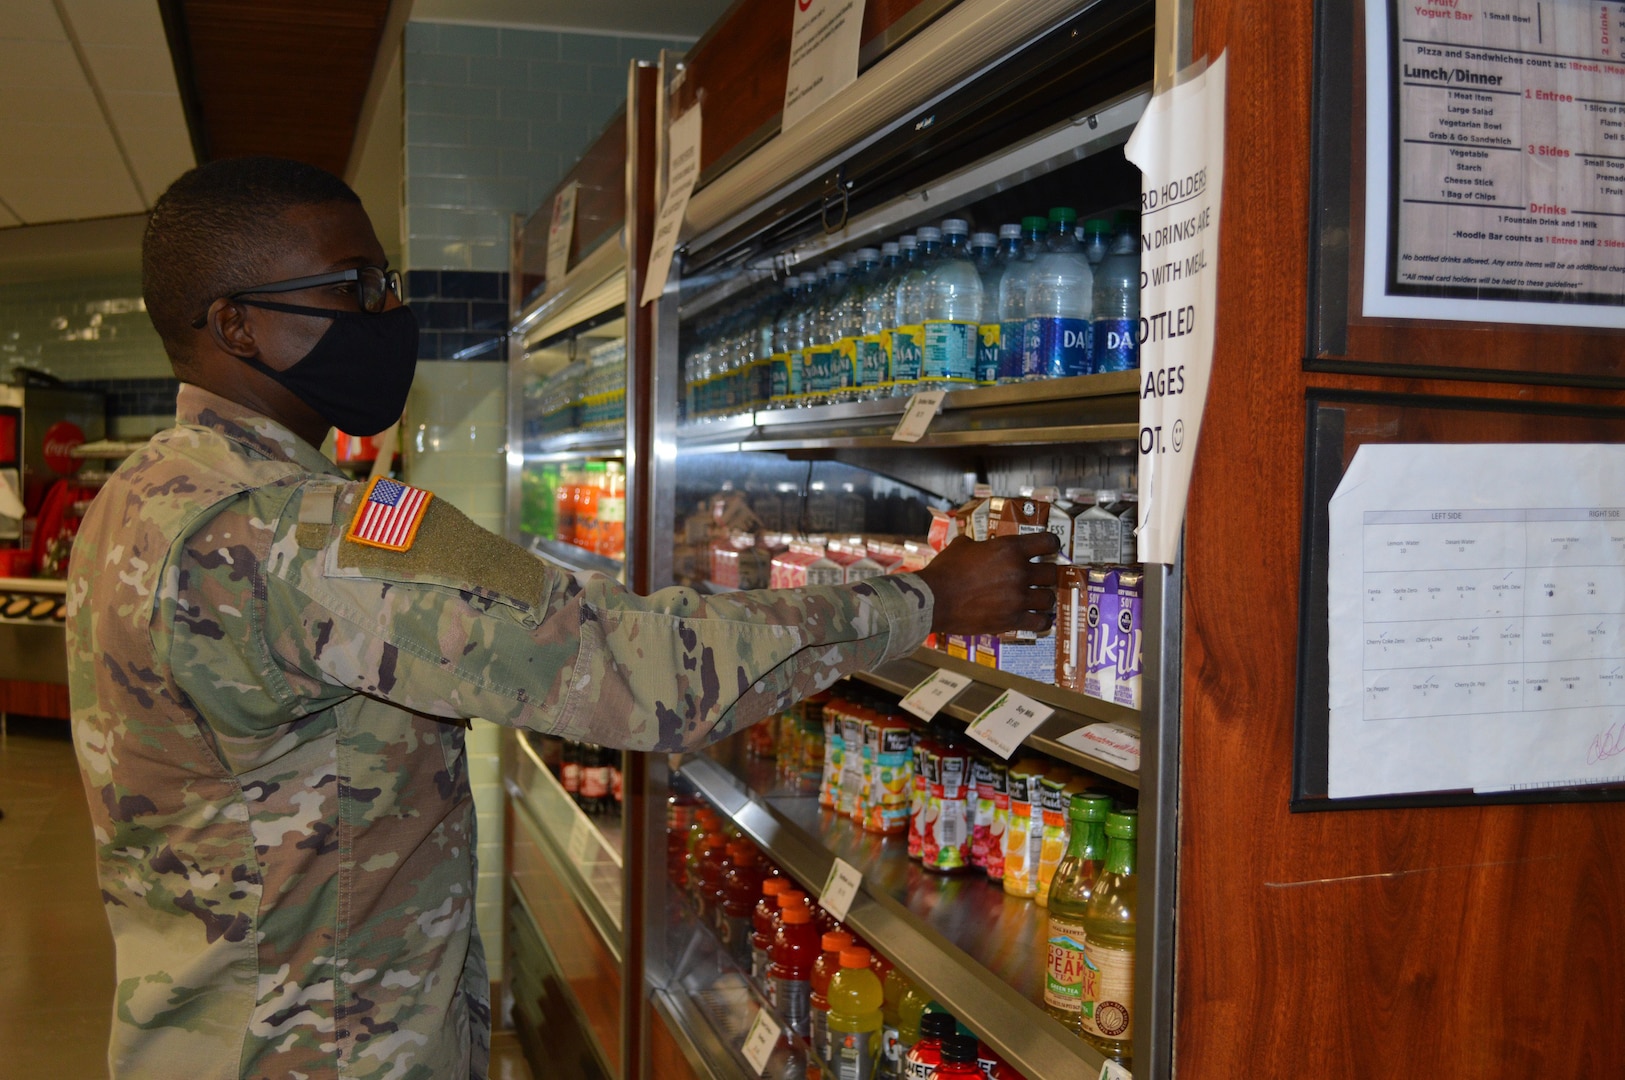 ec. Jean-Rene Louis, a nutrition case specialist in the Department of Nutrition chooses a beverage to go with his meal in the Brooke Army Medical Center dining facility, Dec. 8, 2020. Staff at BAMC’s Nutrition Department encourage everyone to focus on eating healthy during the holiday season and throughout the year. (U.S. Army photo by Daniel Calderón)